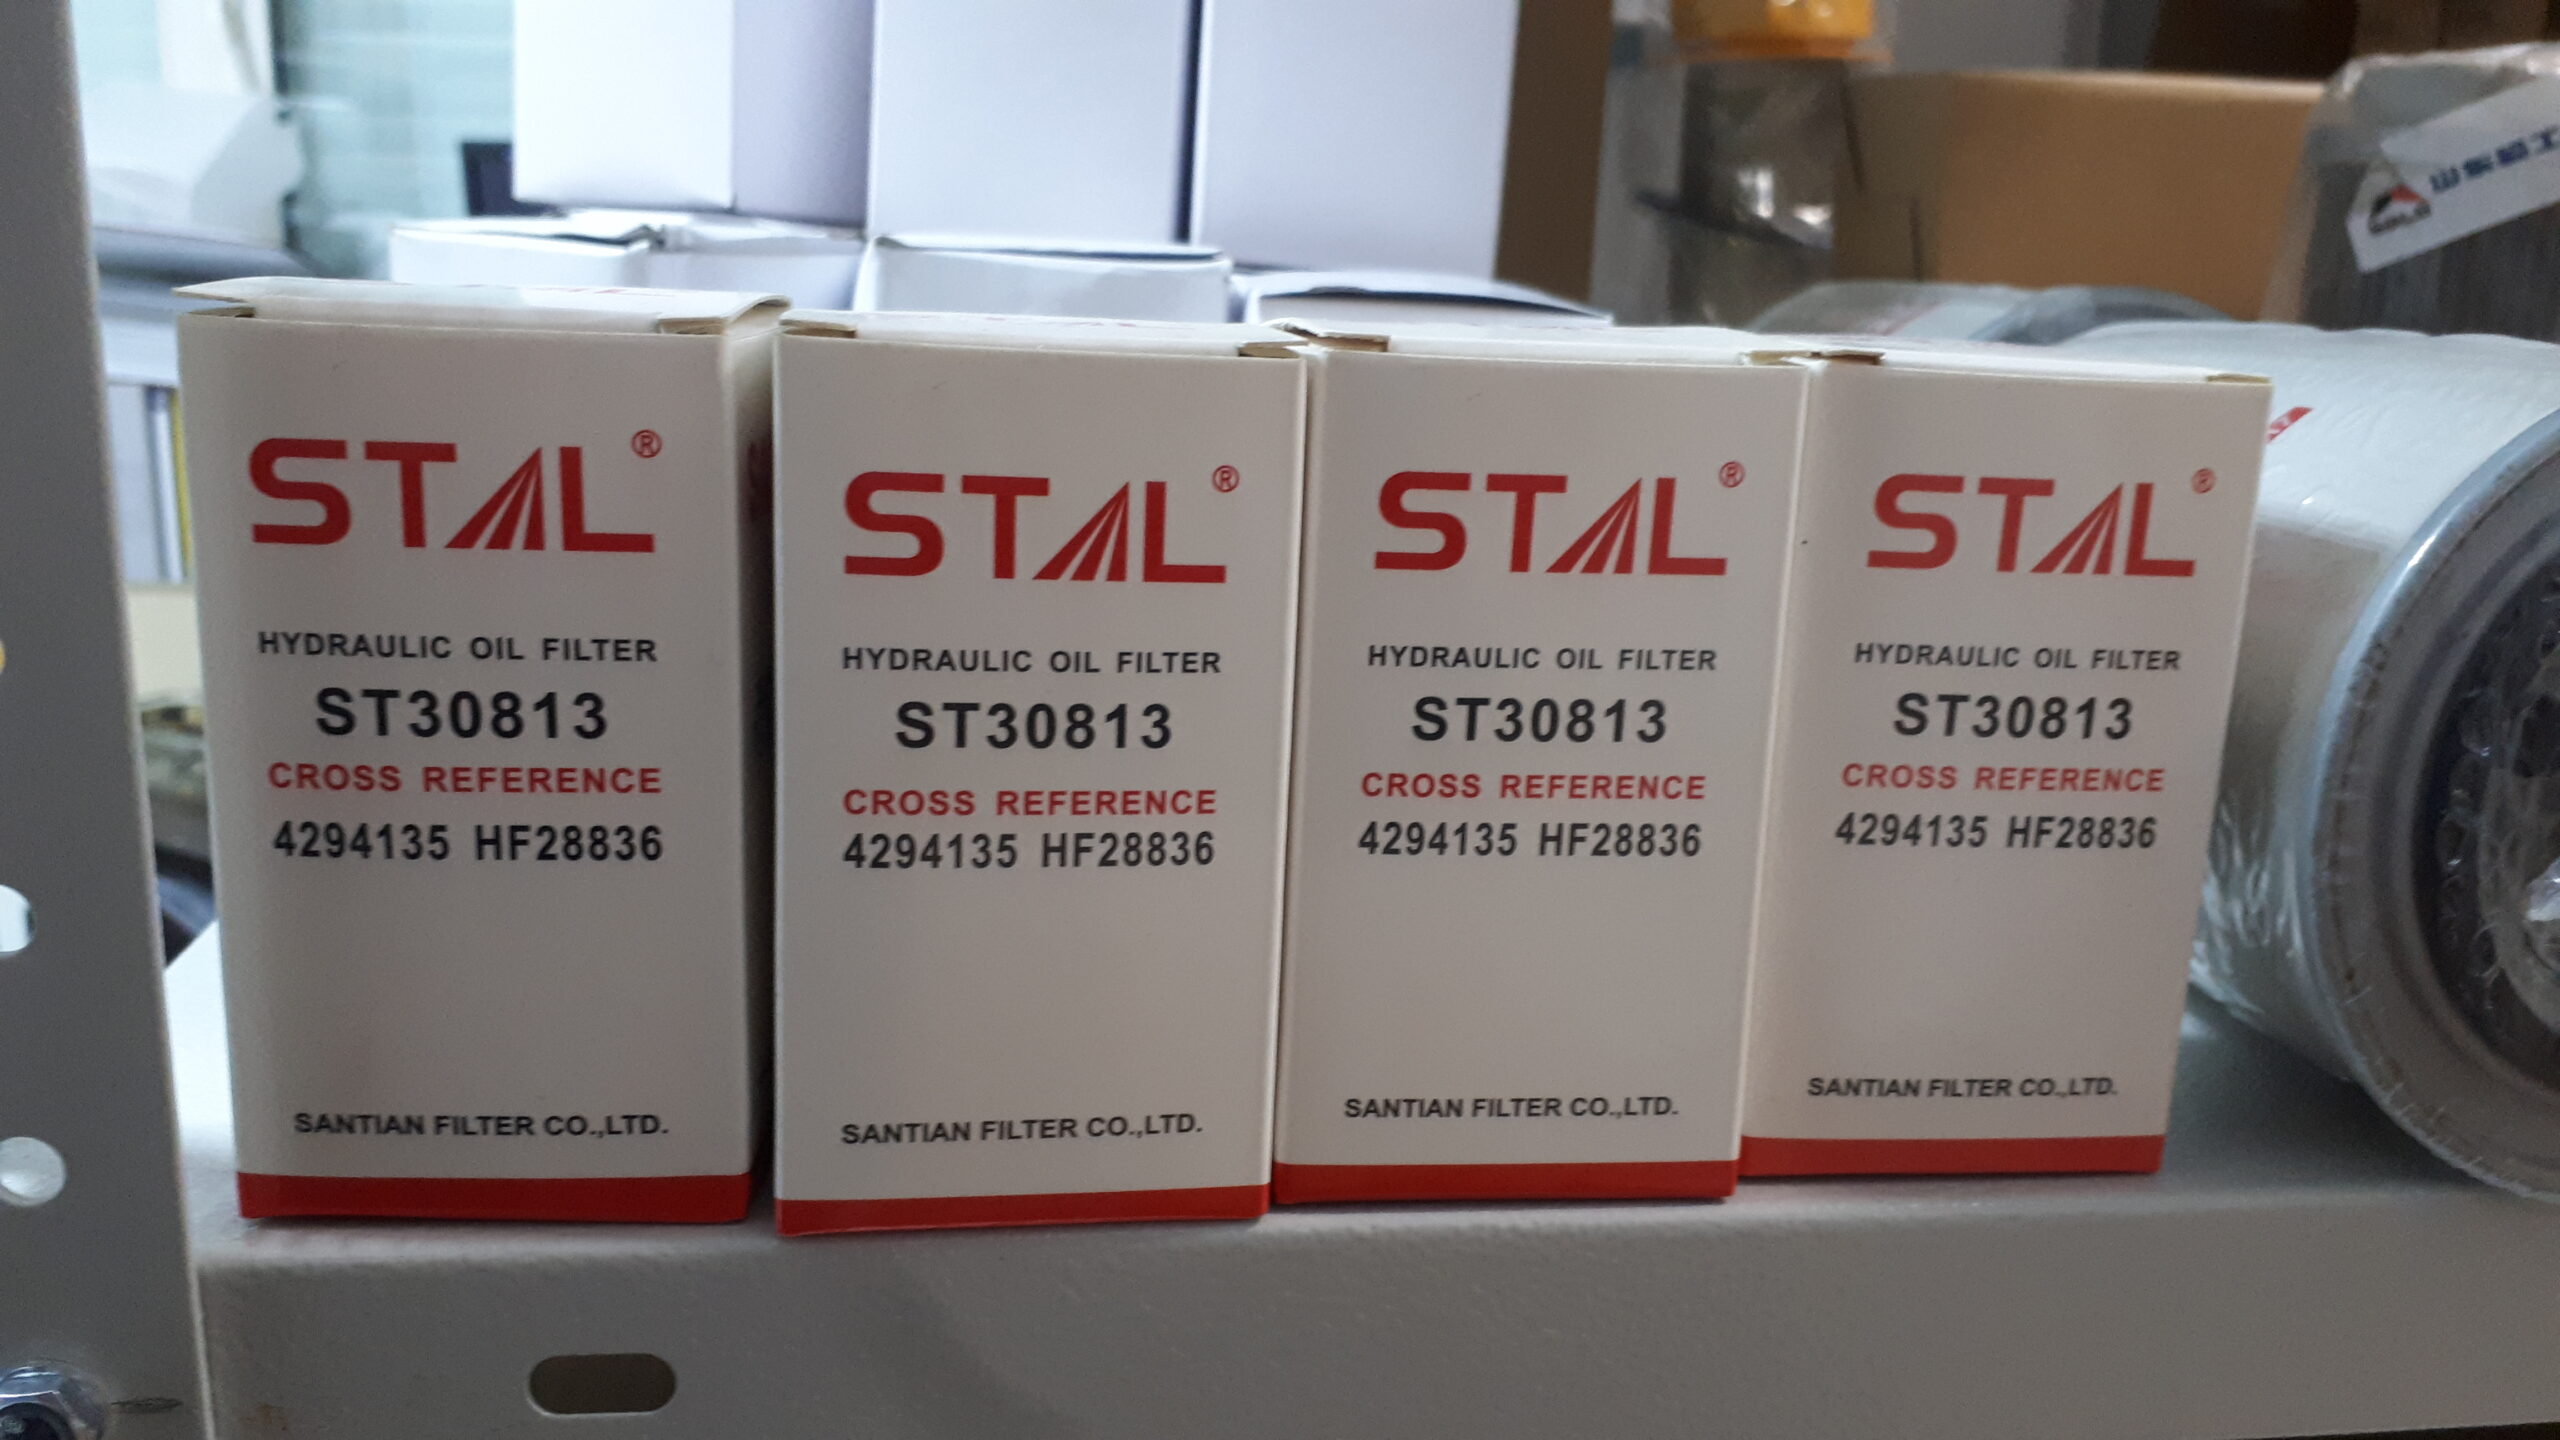 Stal product